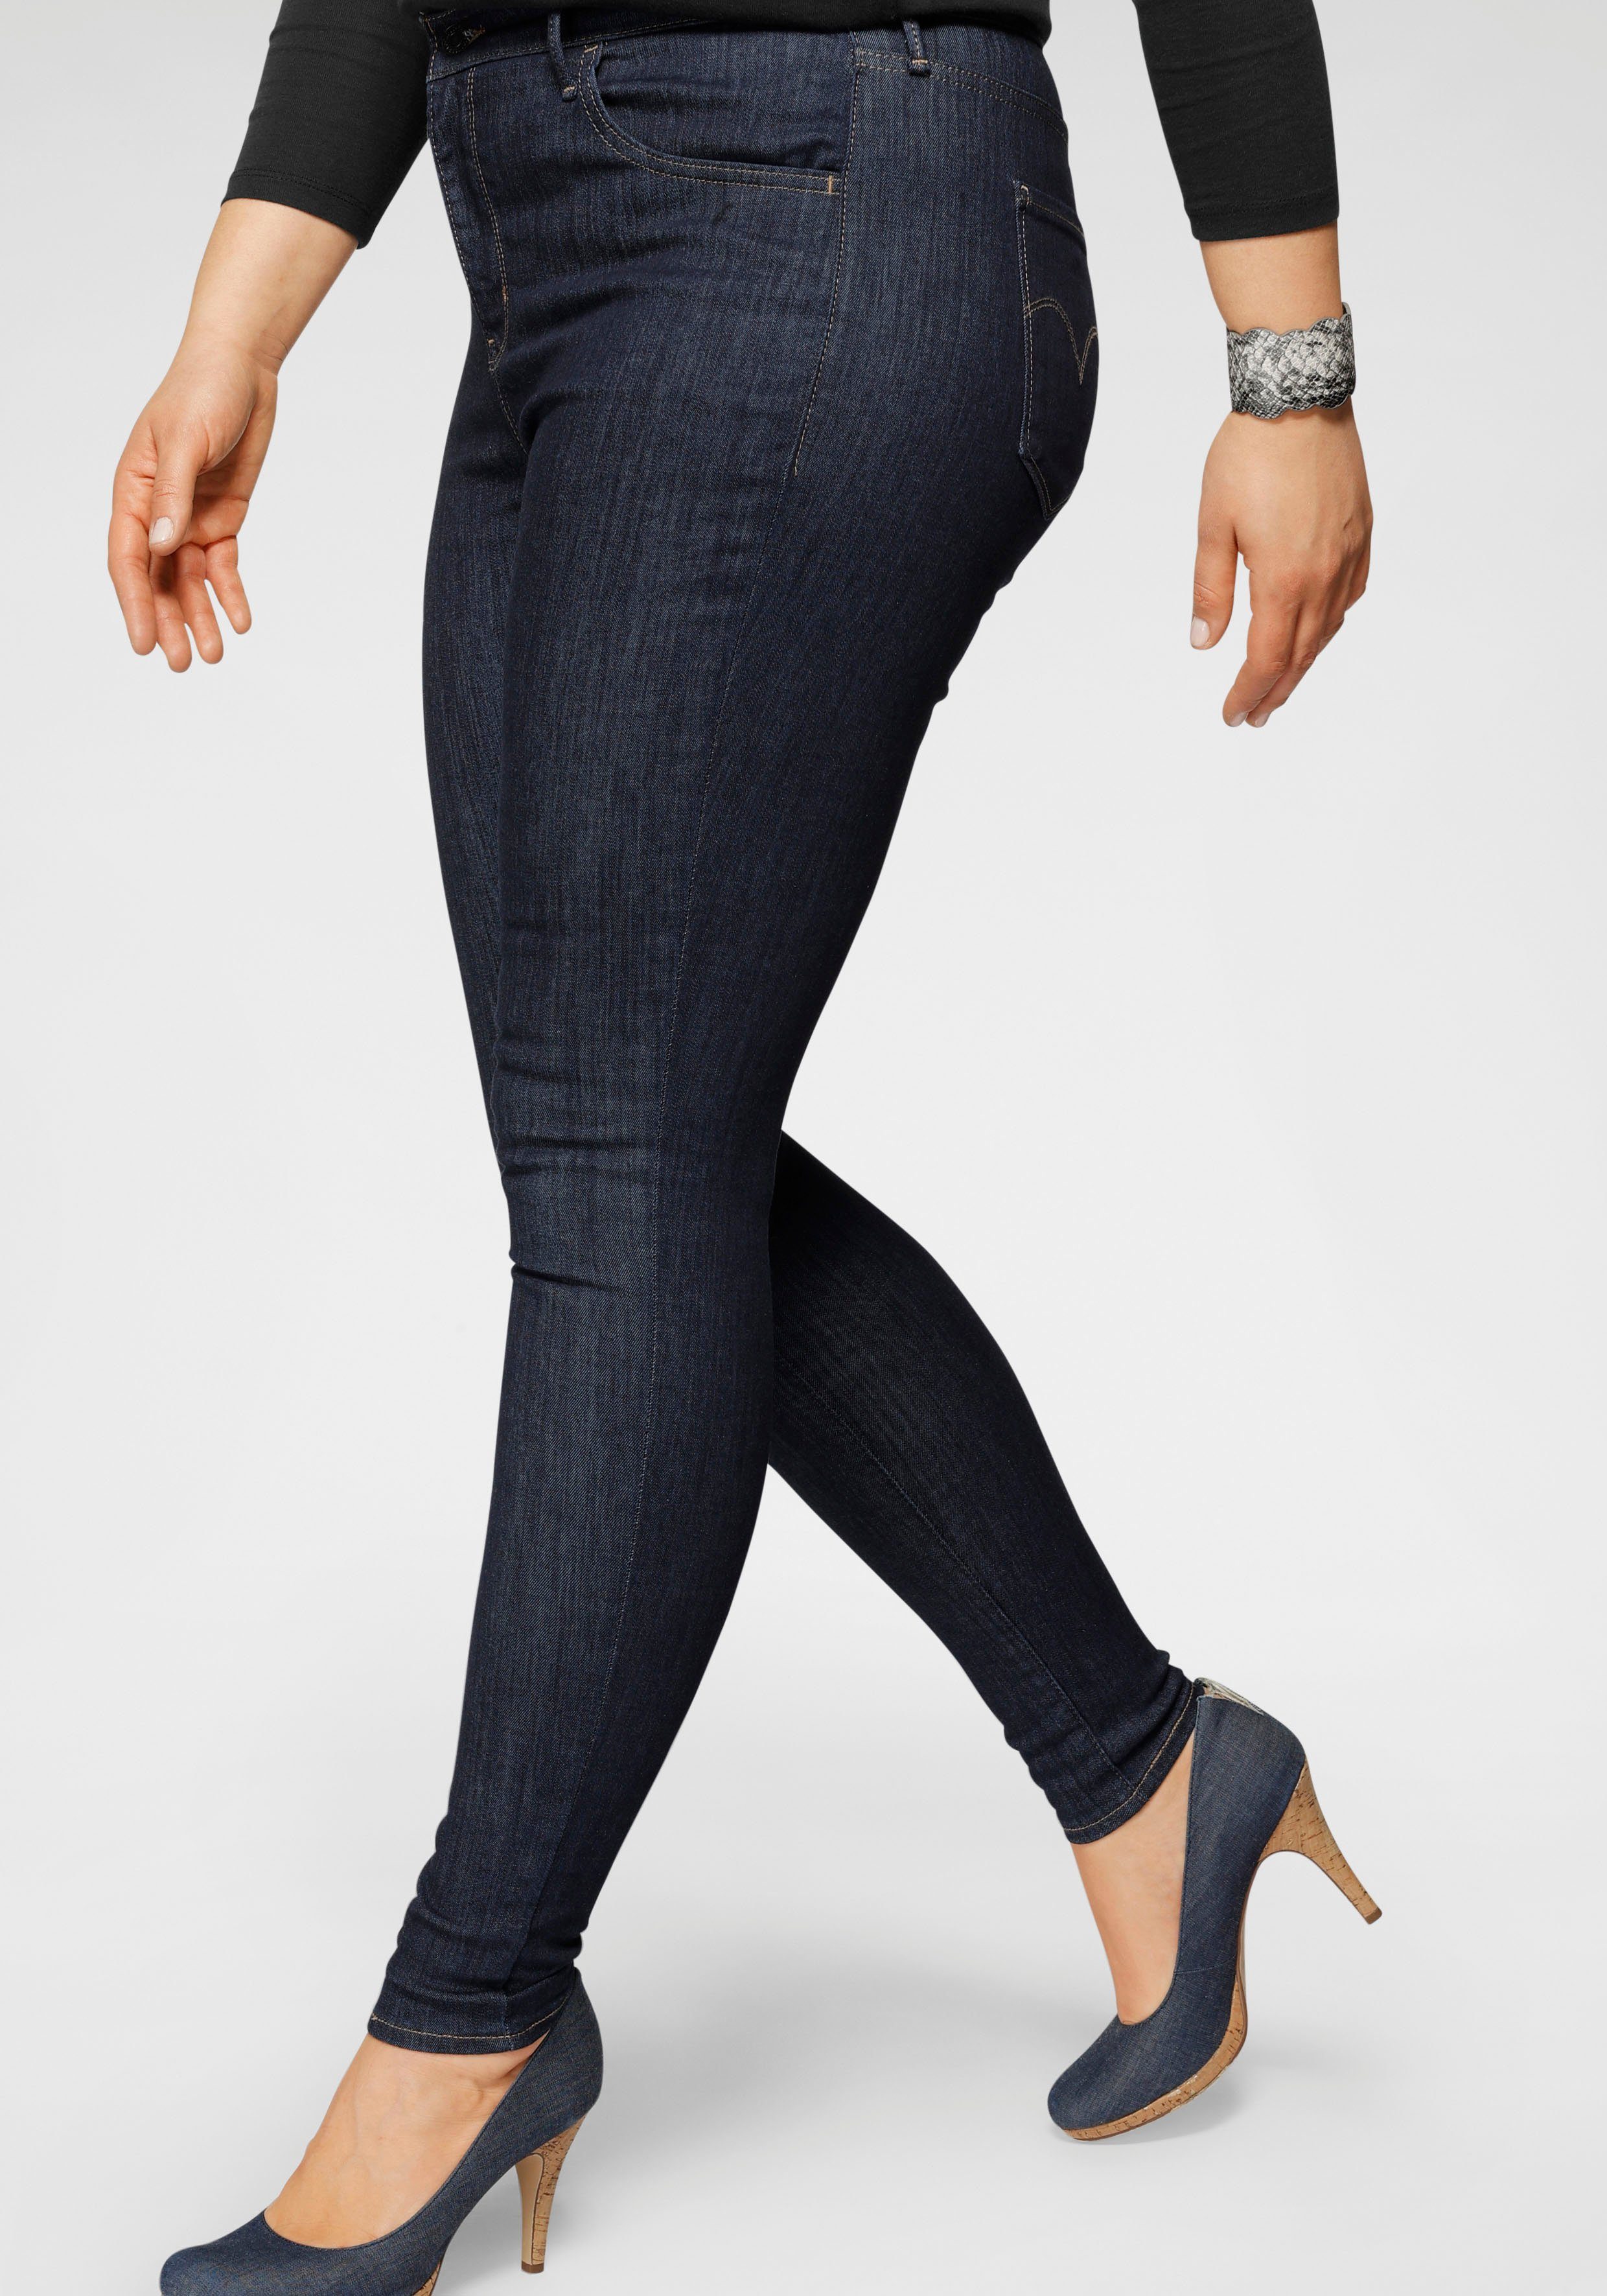 Leibhöhe mit Levi's® rinsed Skinny-fit-Jeans hoher 720 High-Rise Plus